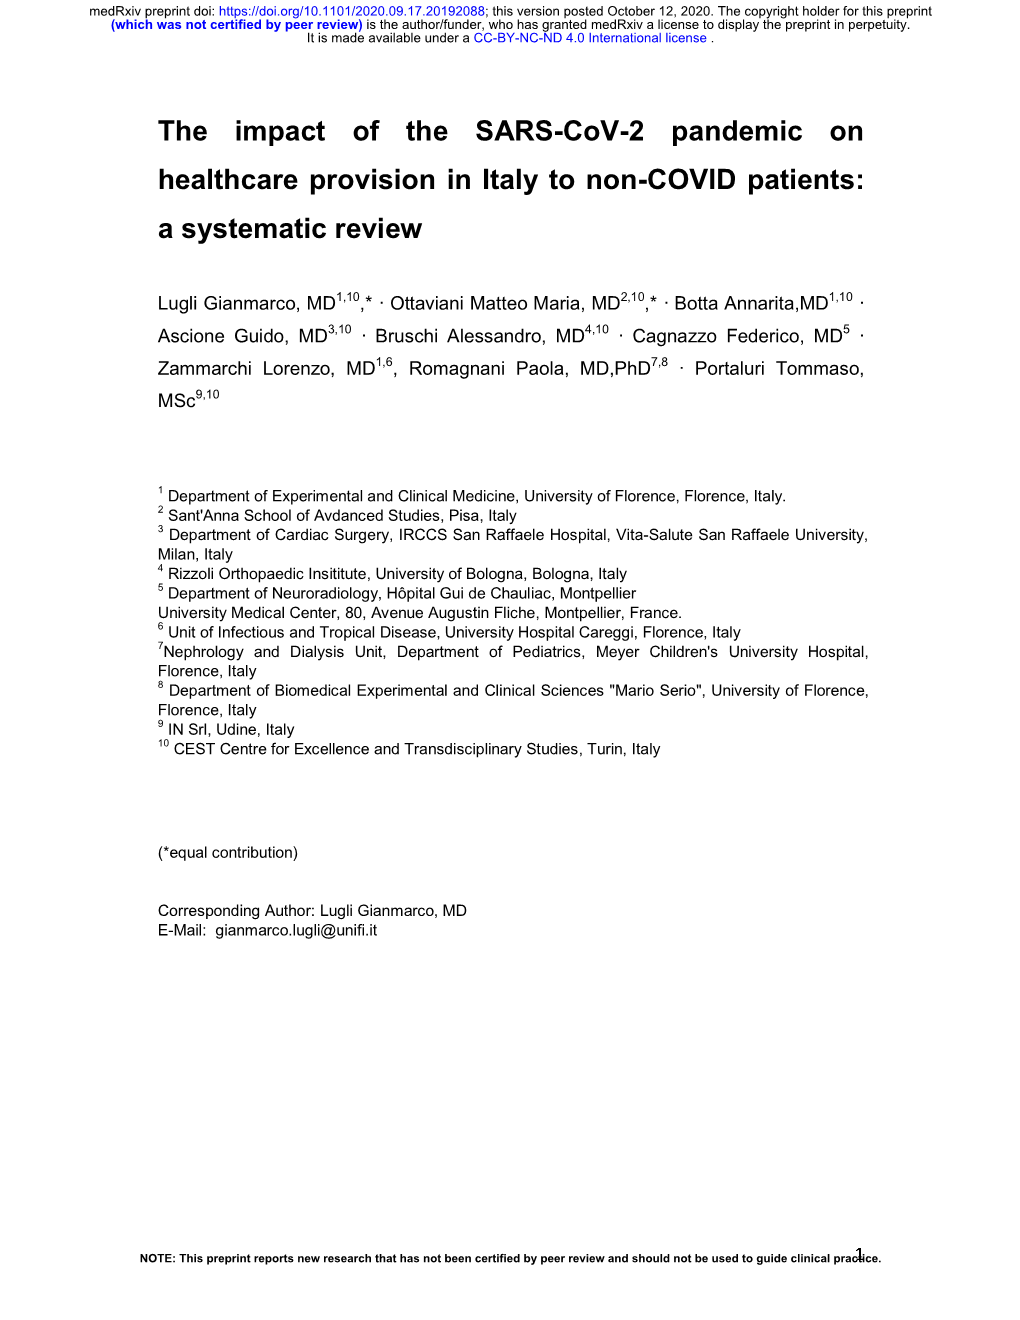 The Impact of the SARS-Cov-2 Pandemic on Healthcare Provision in Italy to Non-COVID Patients: a Systematic Review